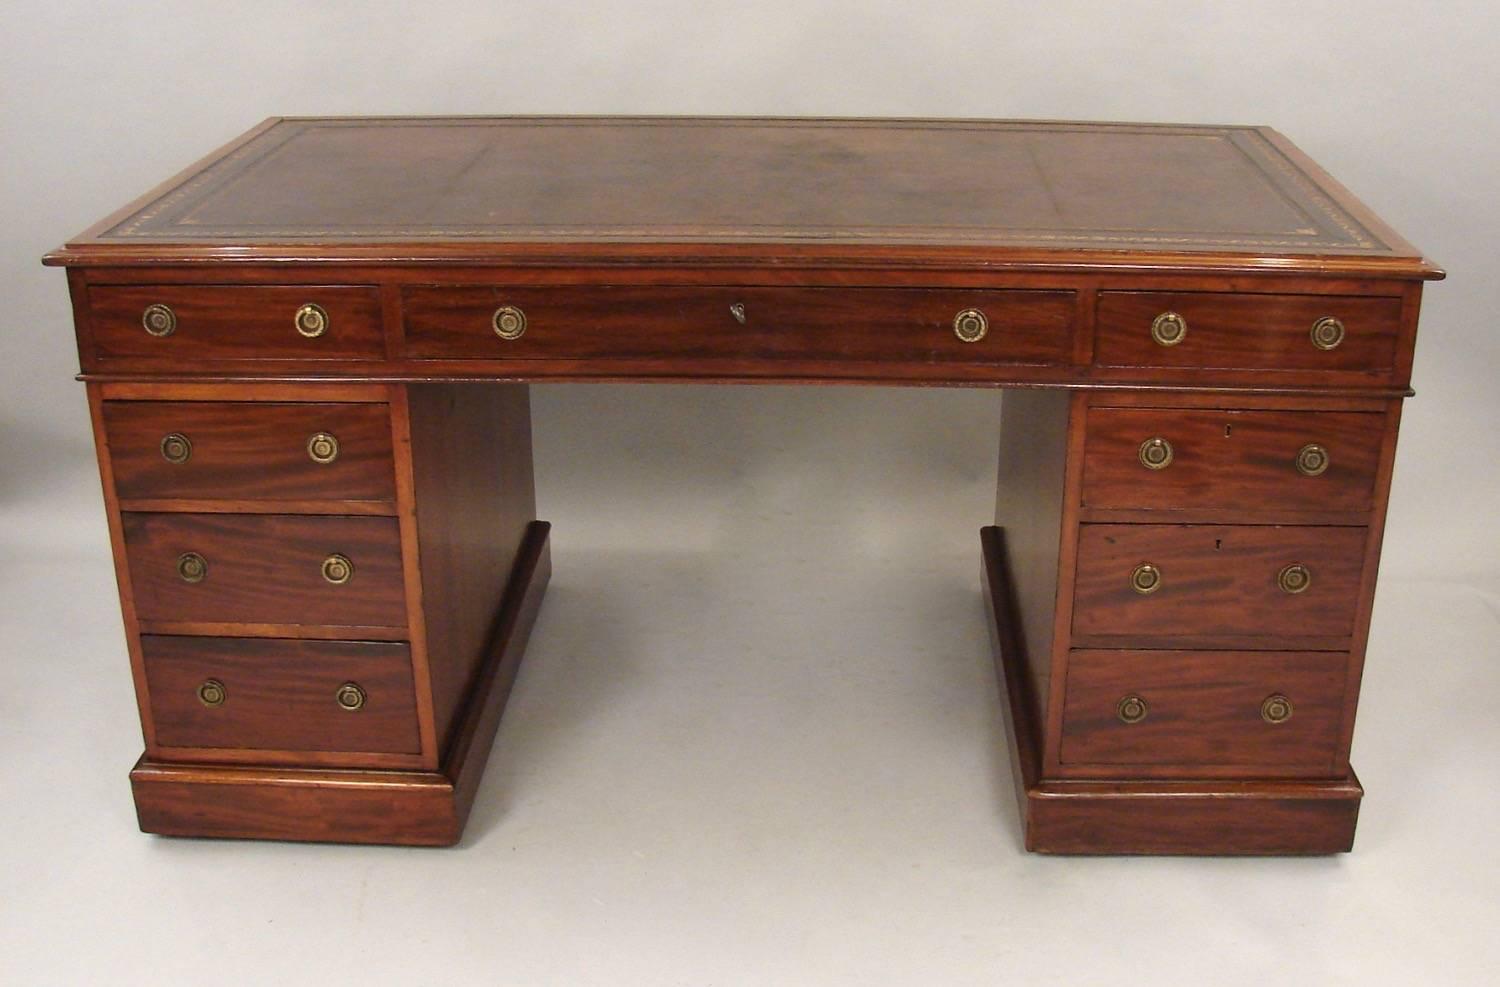 Georgian Style Mahogany Pedestal Desk with Inset Gilt-Tooled Leather Top 3